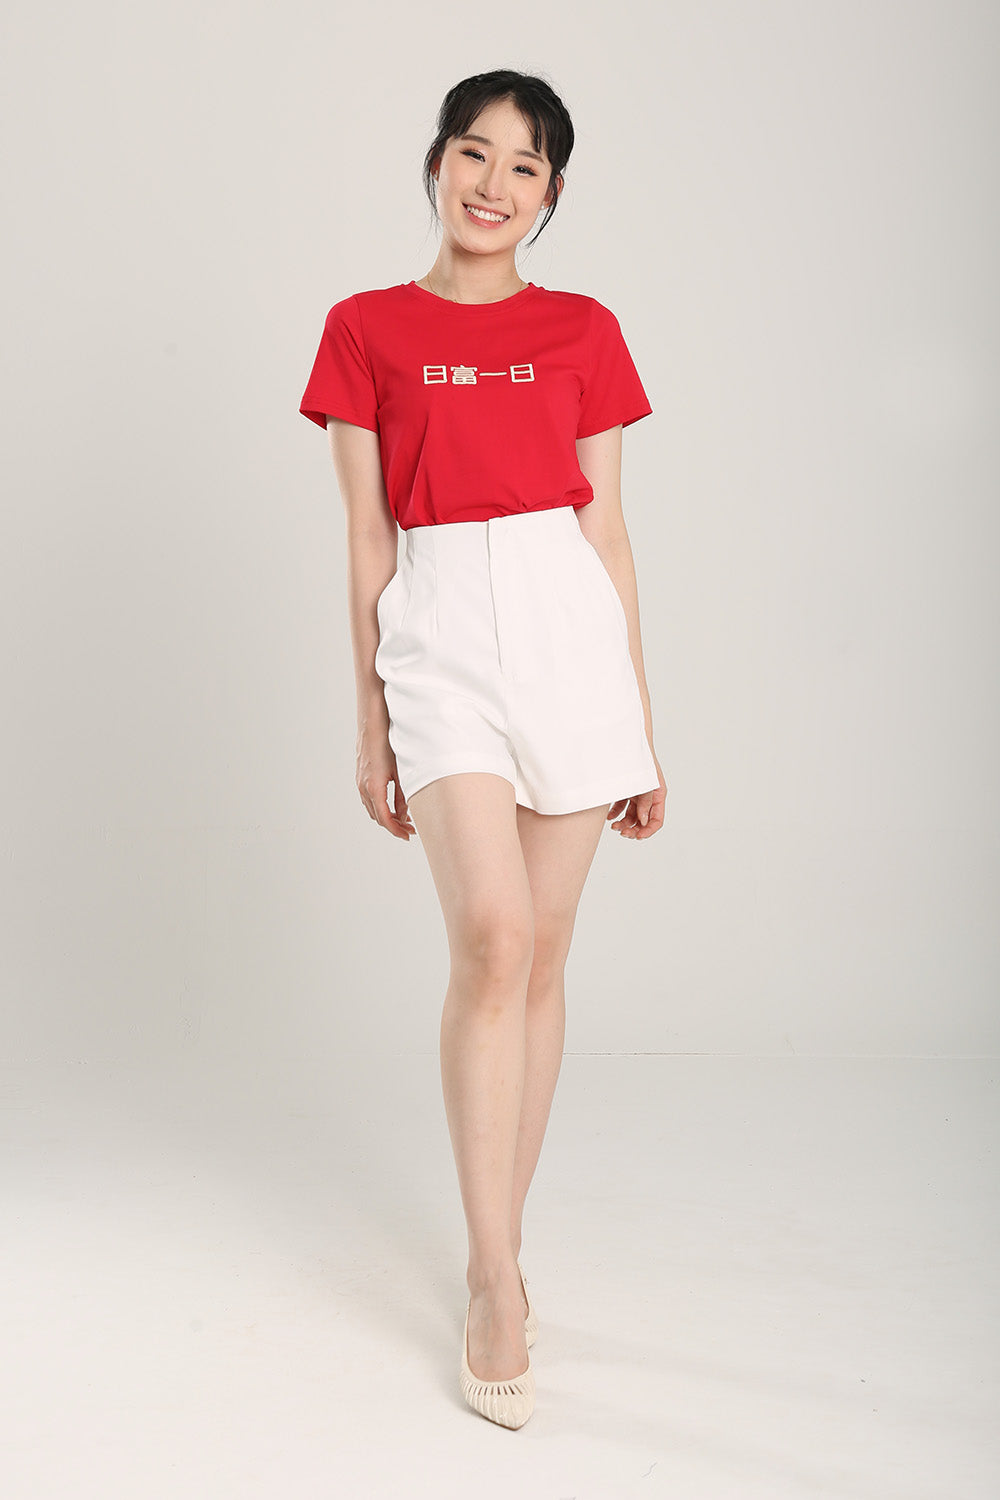 Everyday Riches Embroidered Top in Red